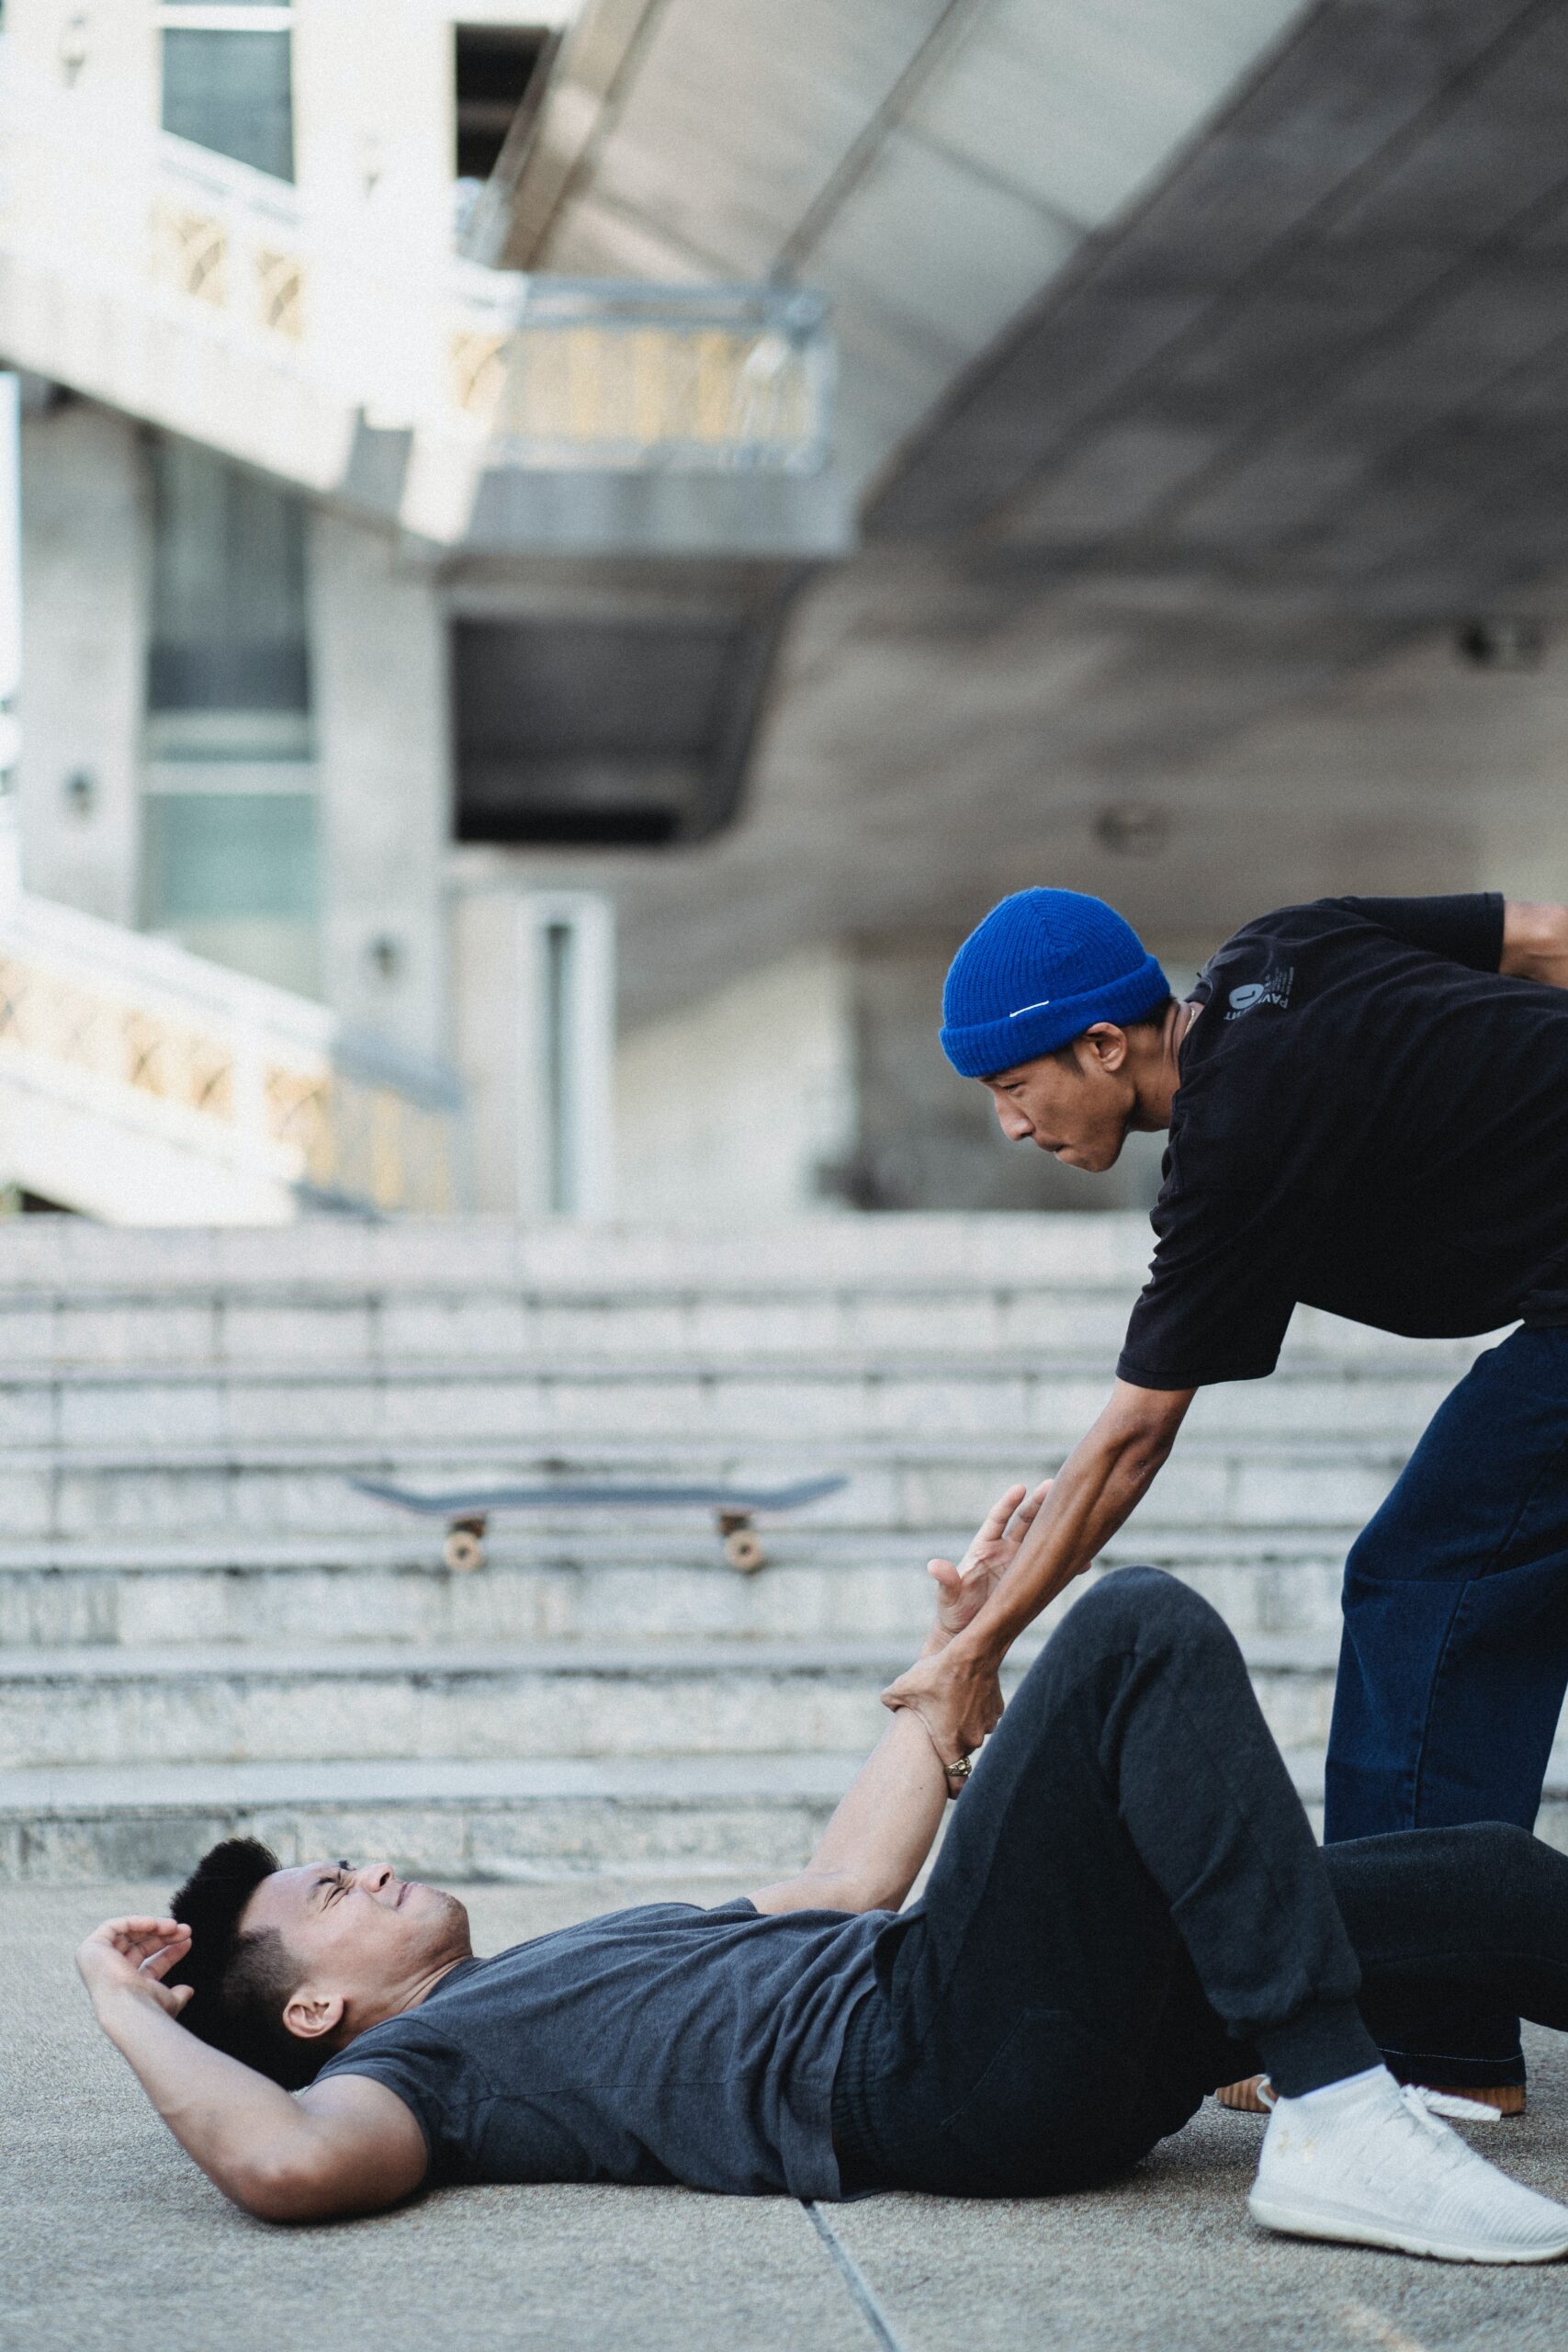 A man helping another person who has fallen on the ground image